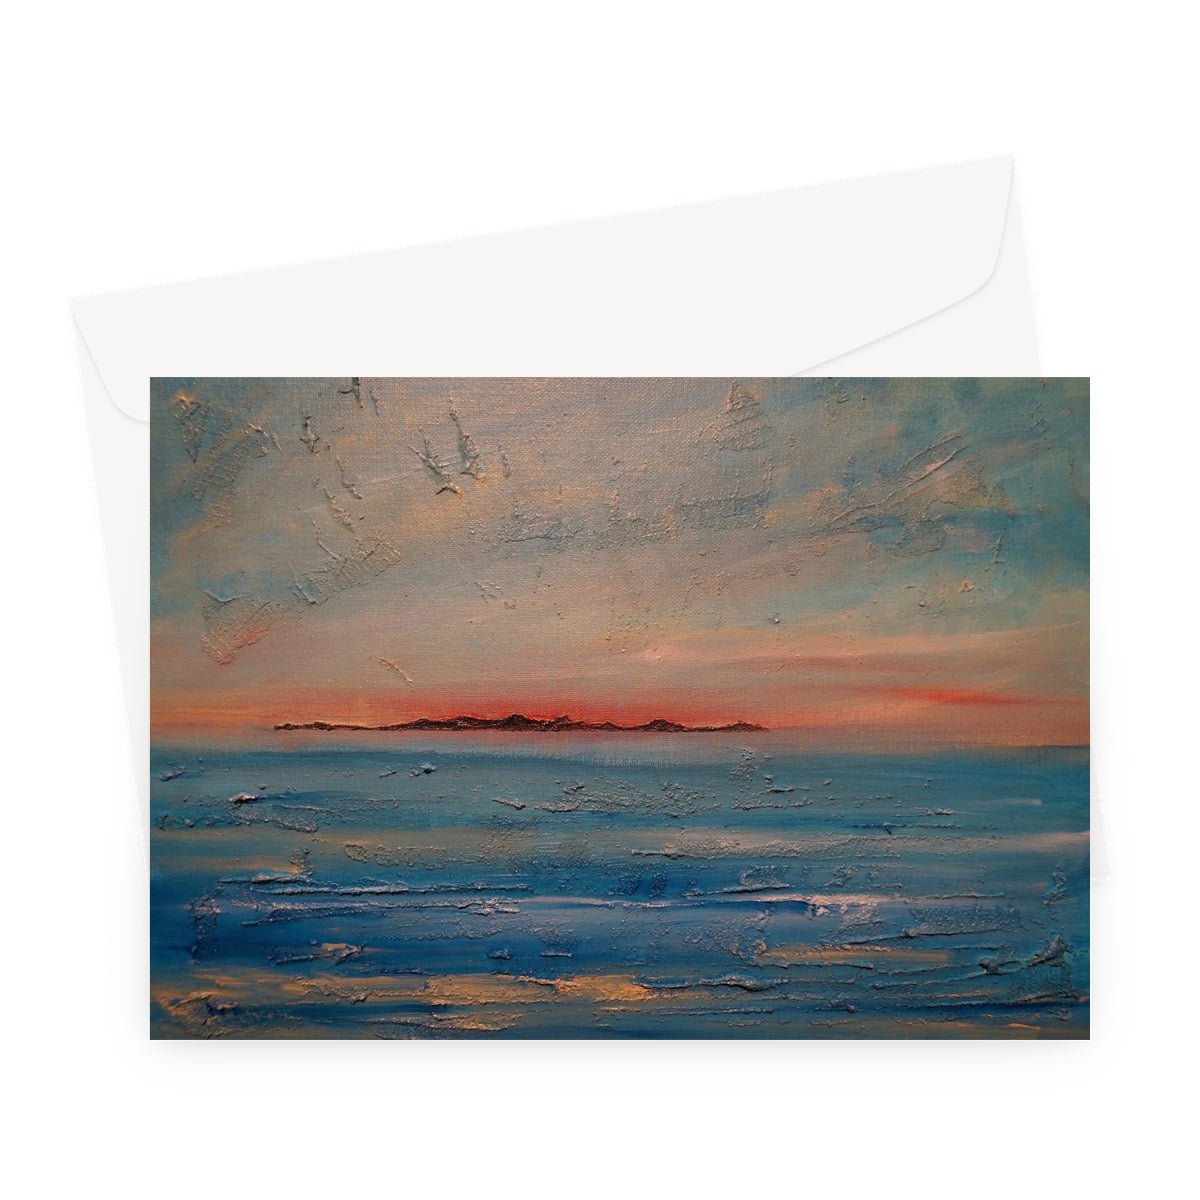 Gigha Sunset Art Gifts Greeting Card-Greetings Cards-Hebridean Islands Art Gallery-A5 Landscape-10 Cards-Paintings, Prints, Homeware, Art Gifts From Scotland By Scottish Artist Kevin Hunter